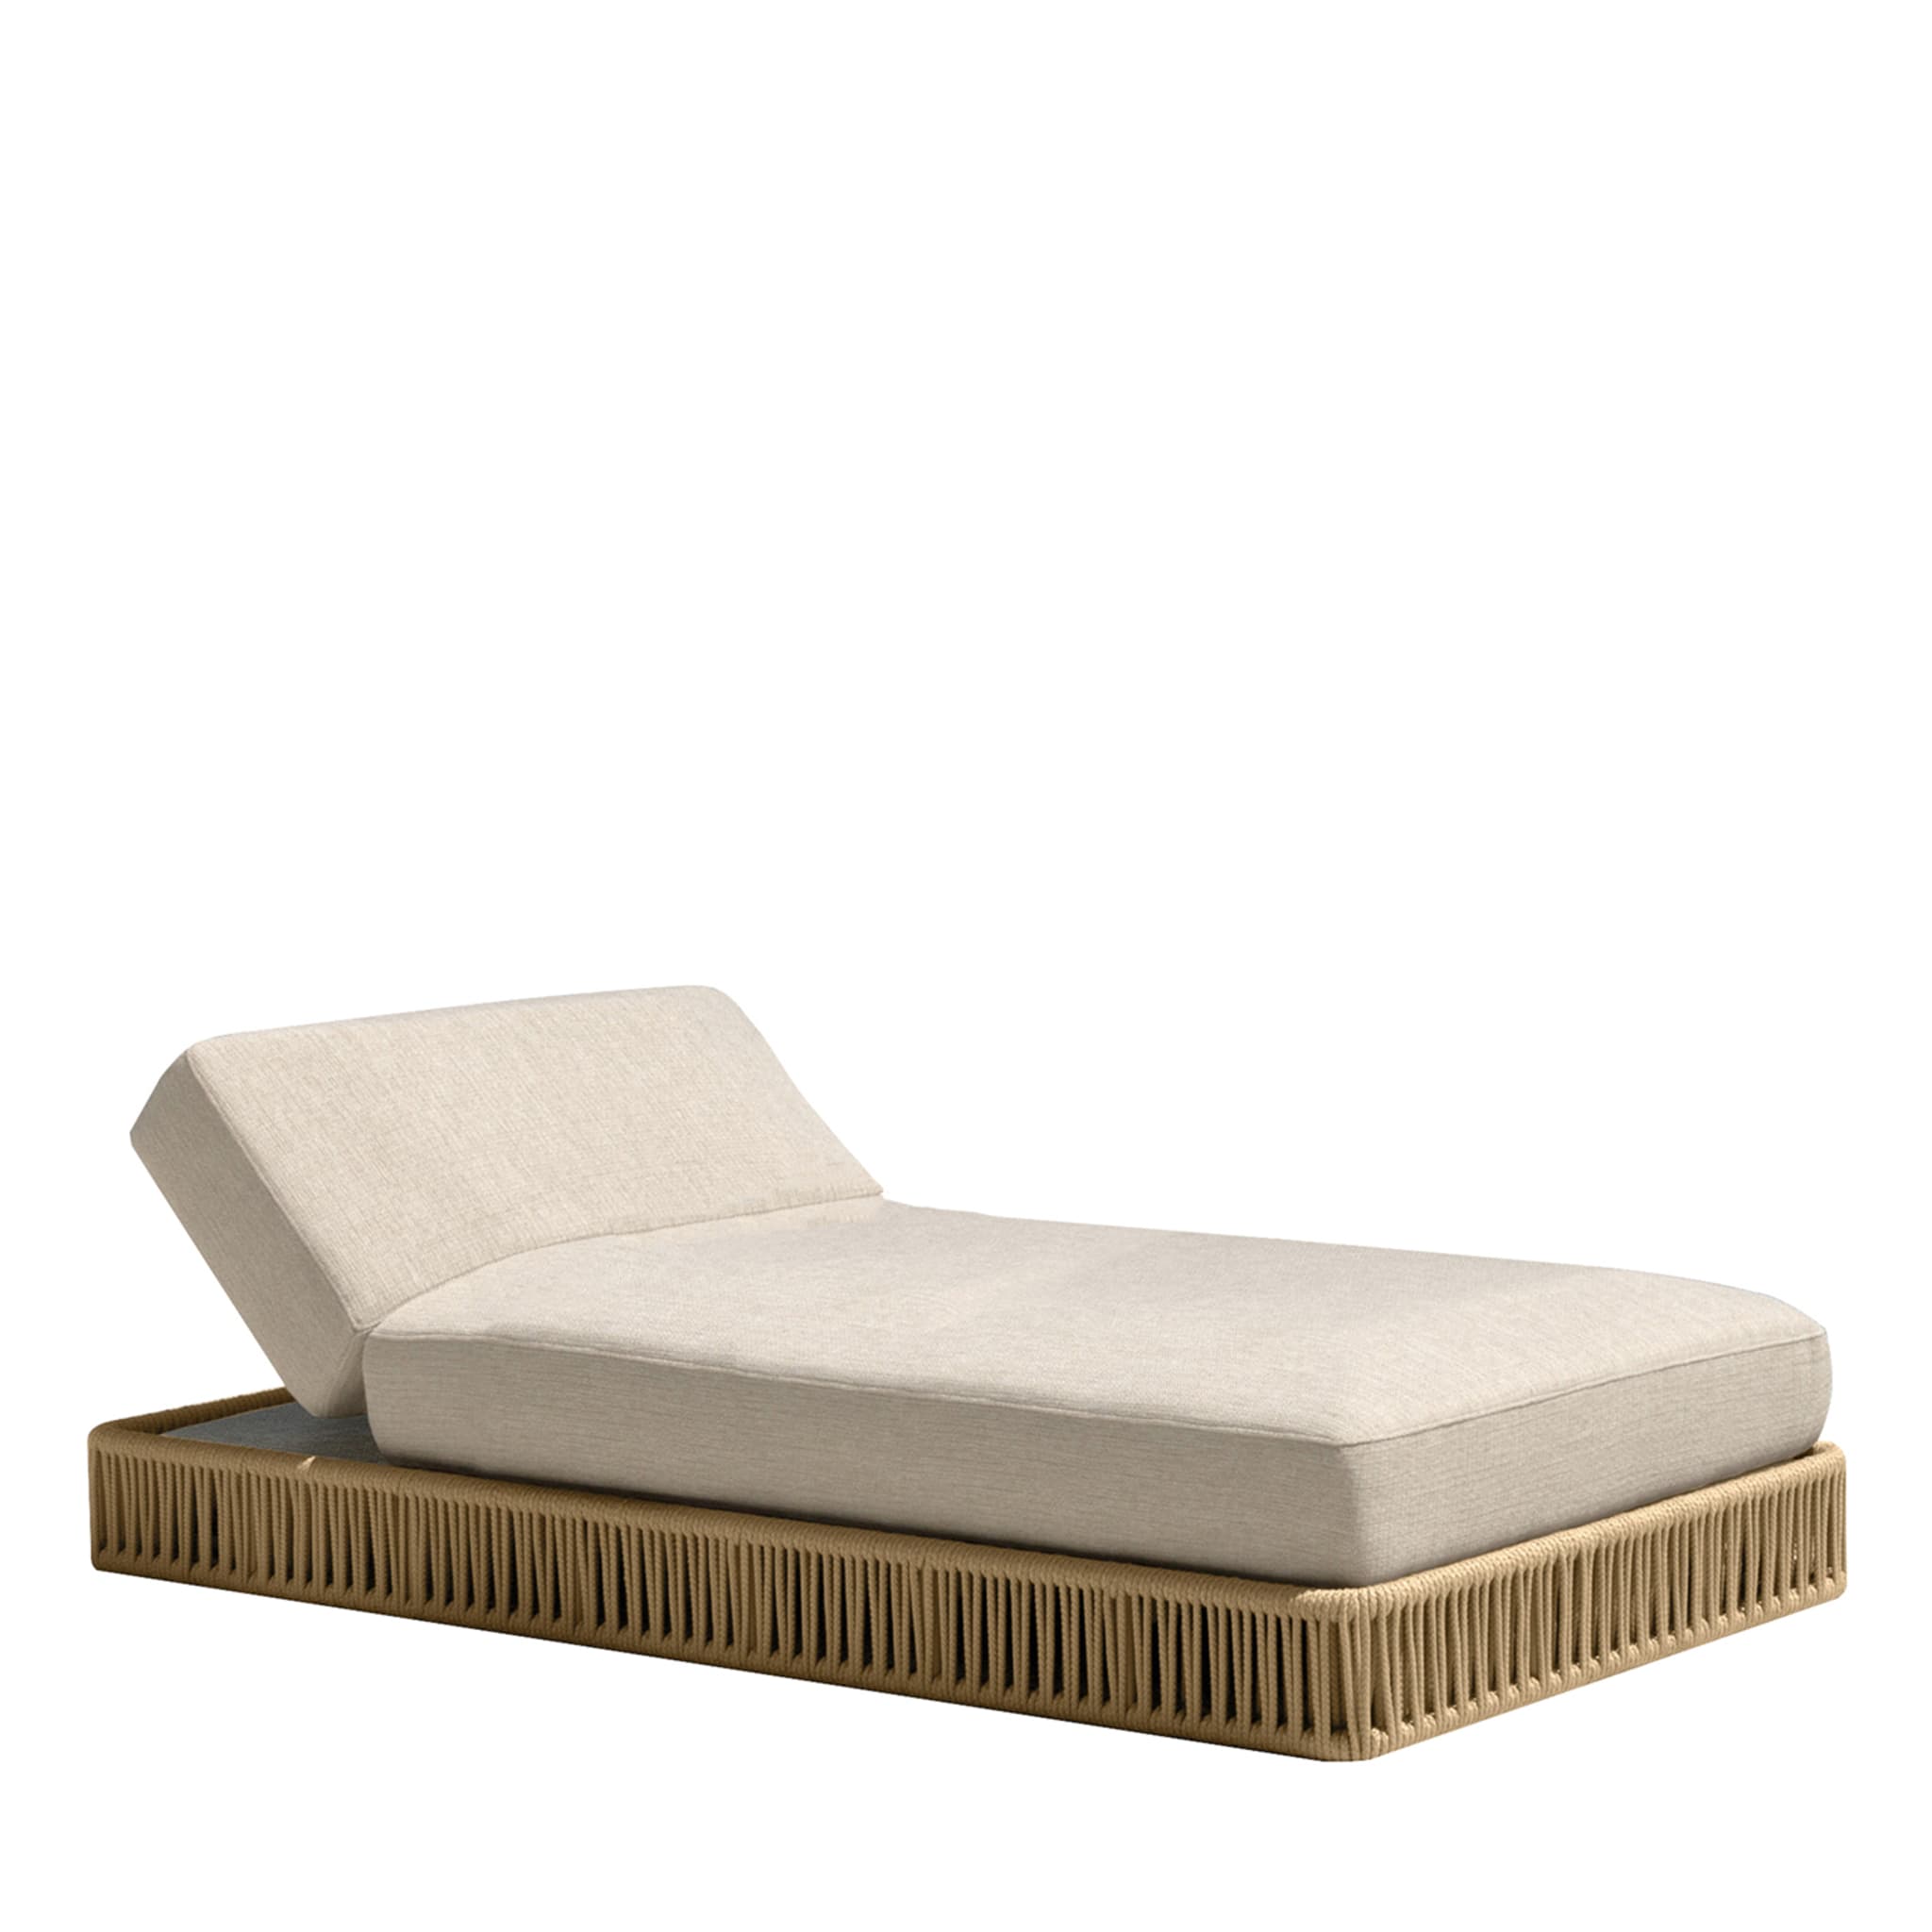 Cliff Beige Sunbed by Ludovica & Roberto Palomba - Main view